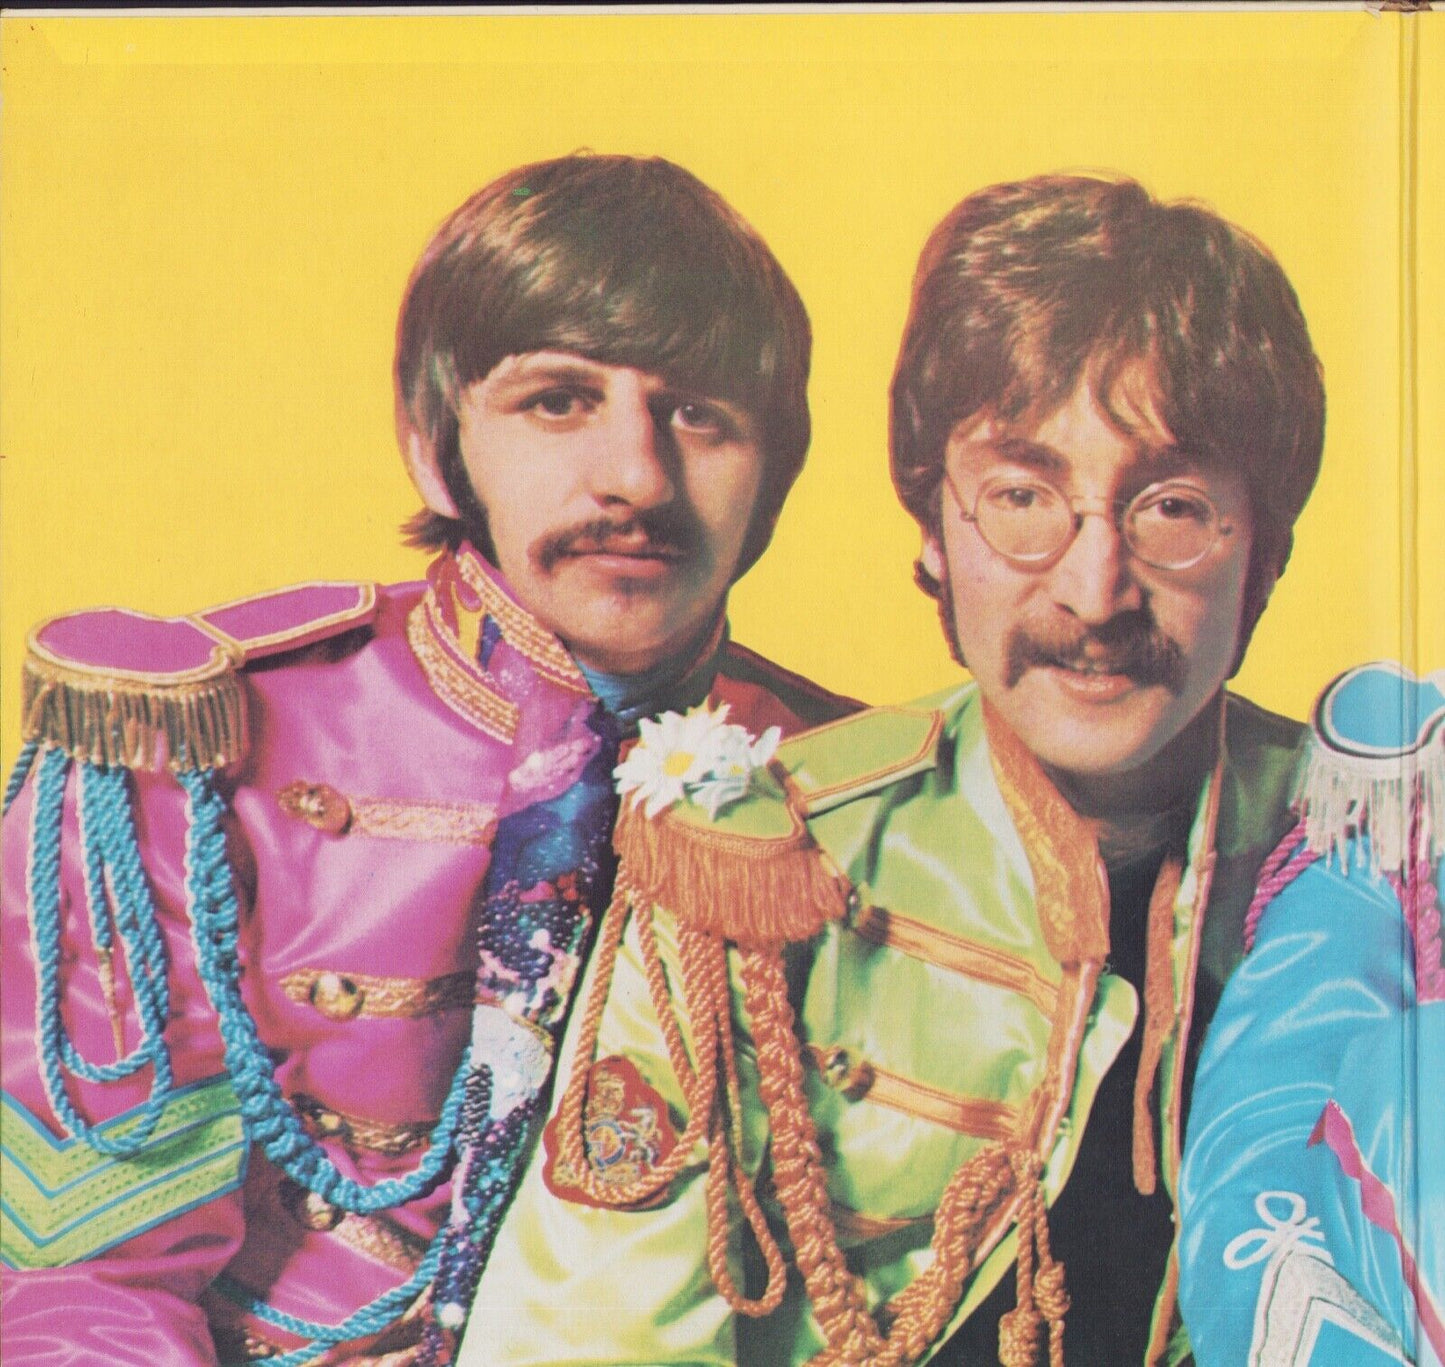 The Beatles ‎- Sgt. Pepper's Lonely Hearts Club Band Vinyl LP